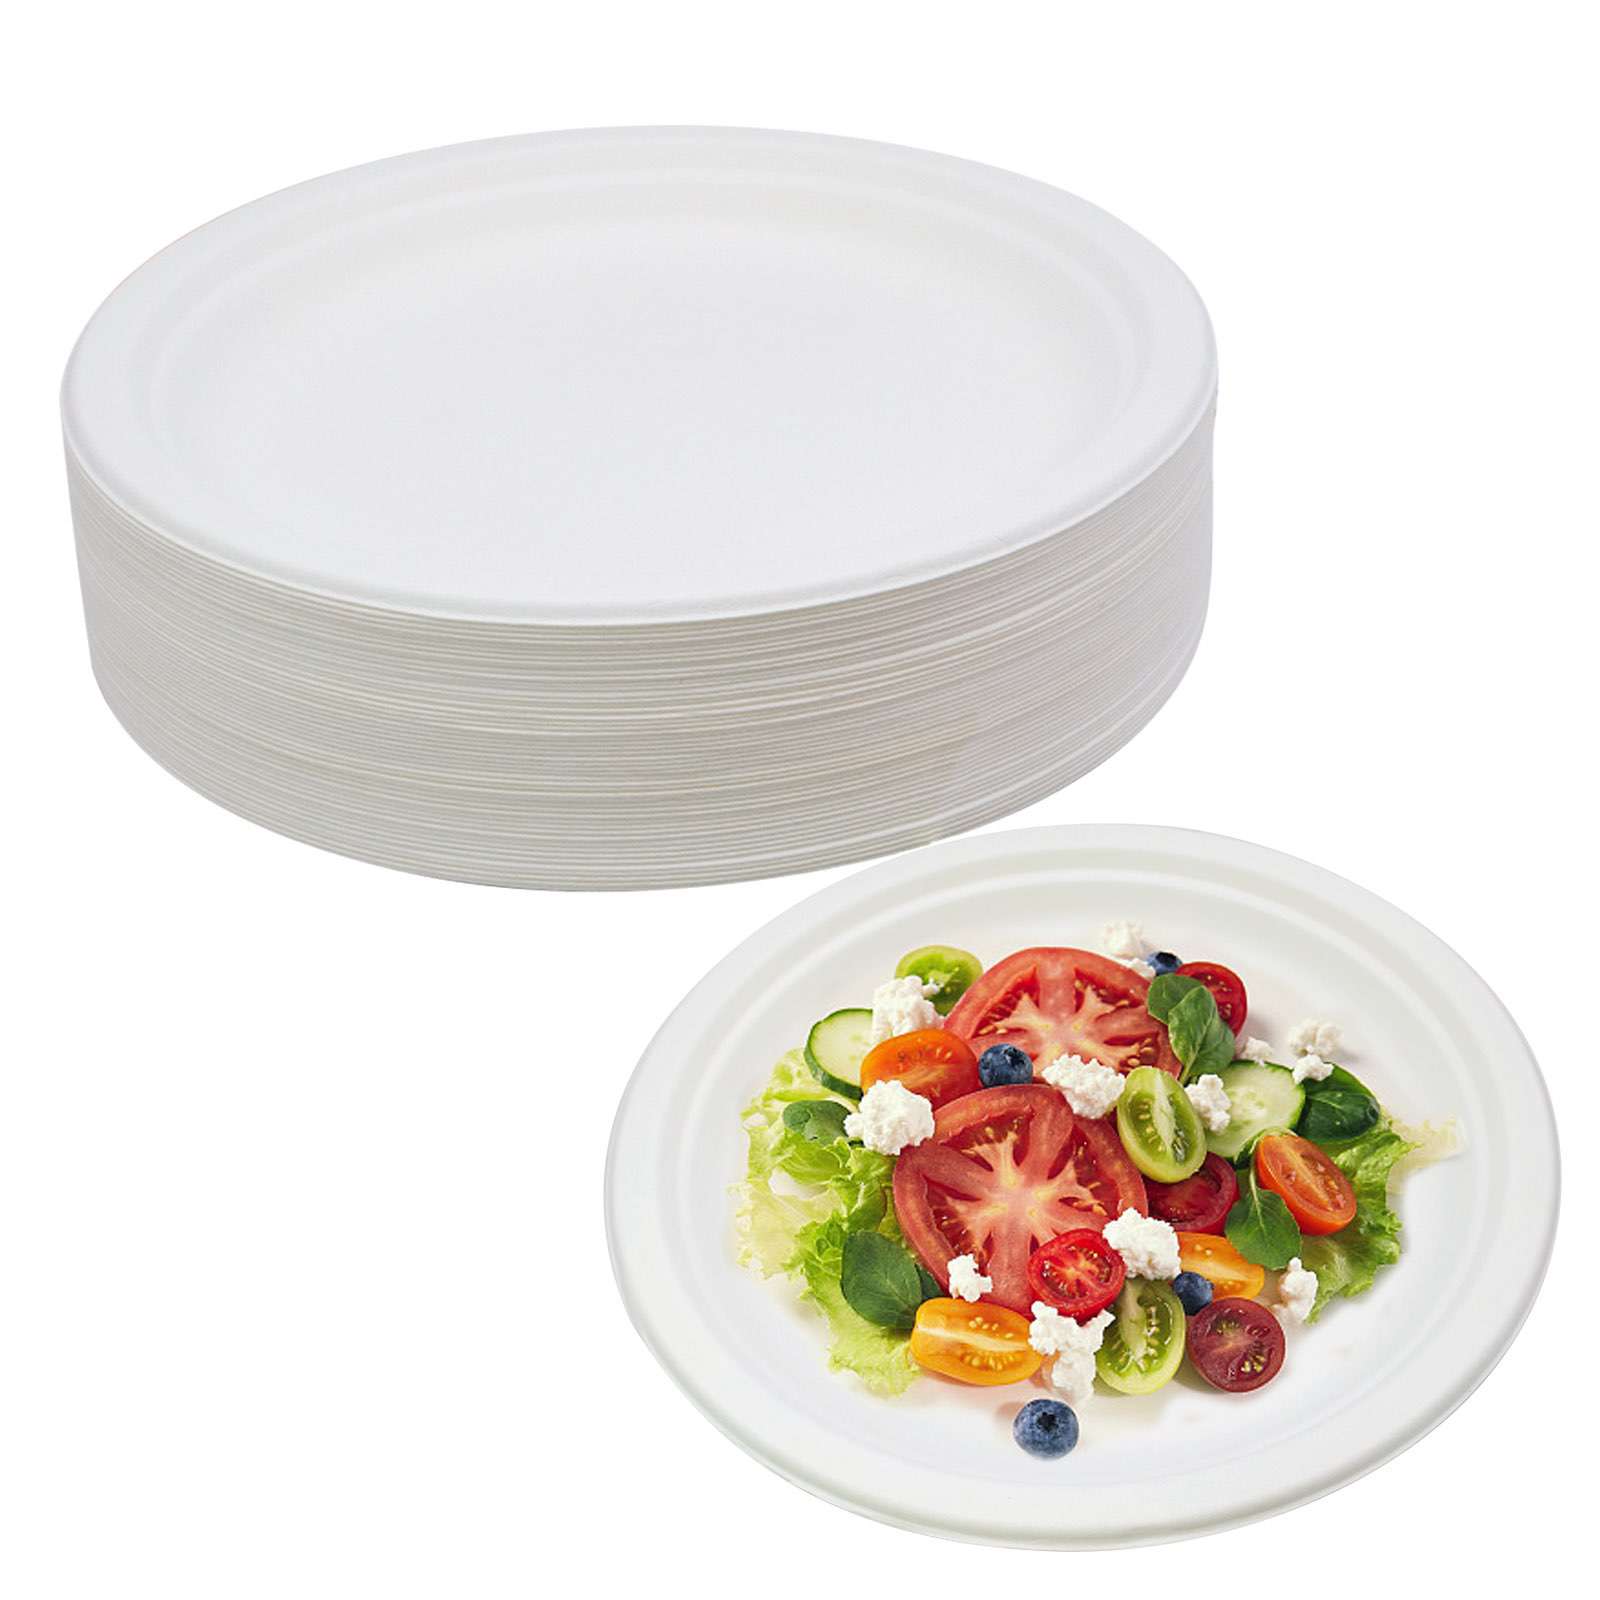 50 x WHITE PAPER PLATES ROUND 9" 7" TABLEWARE PARTY  DISPOSABLE NEW